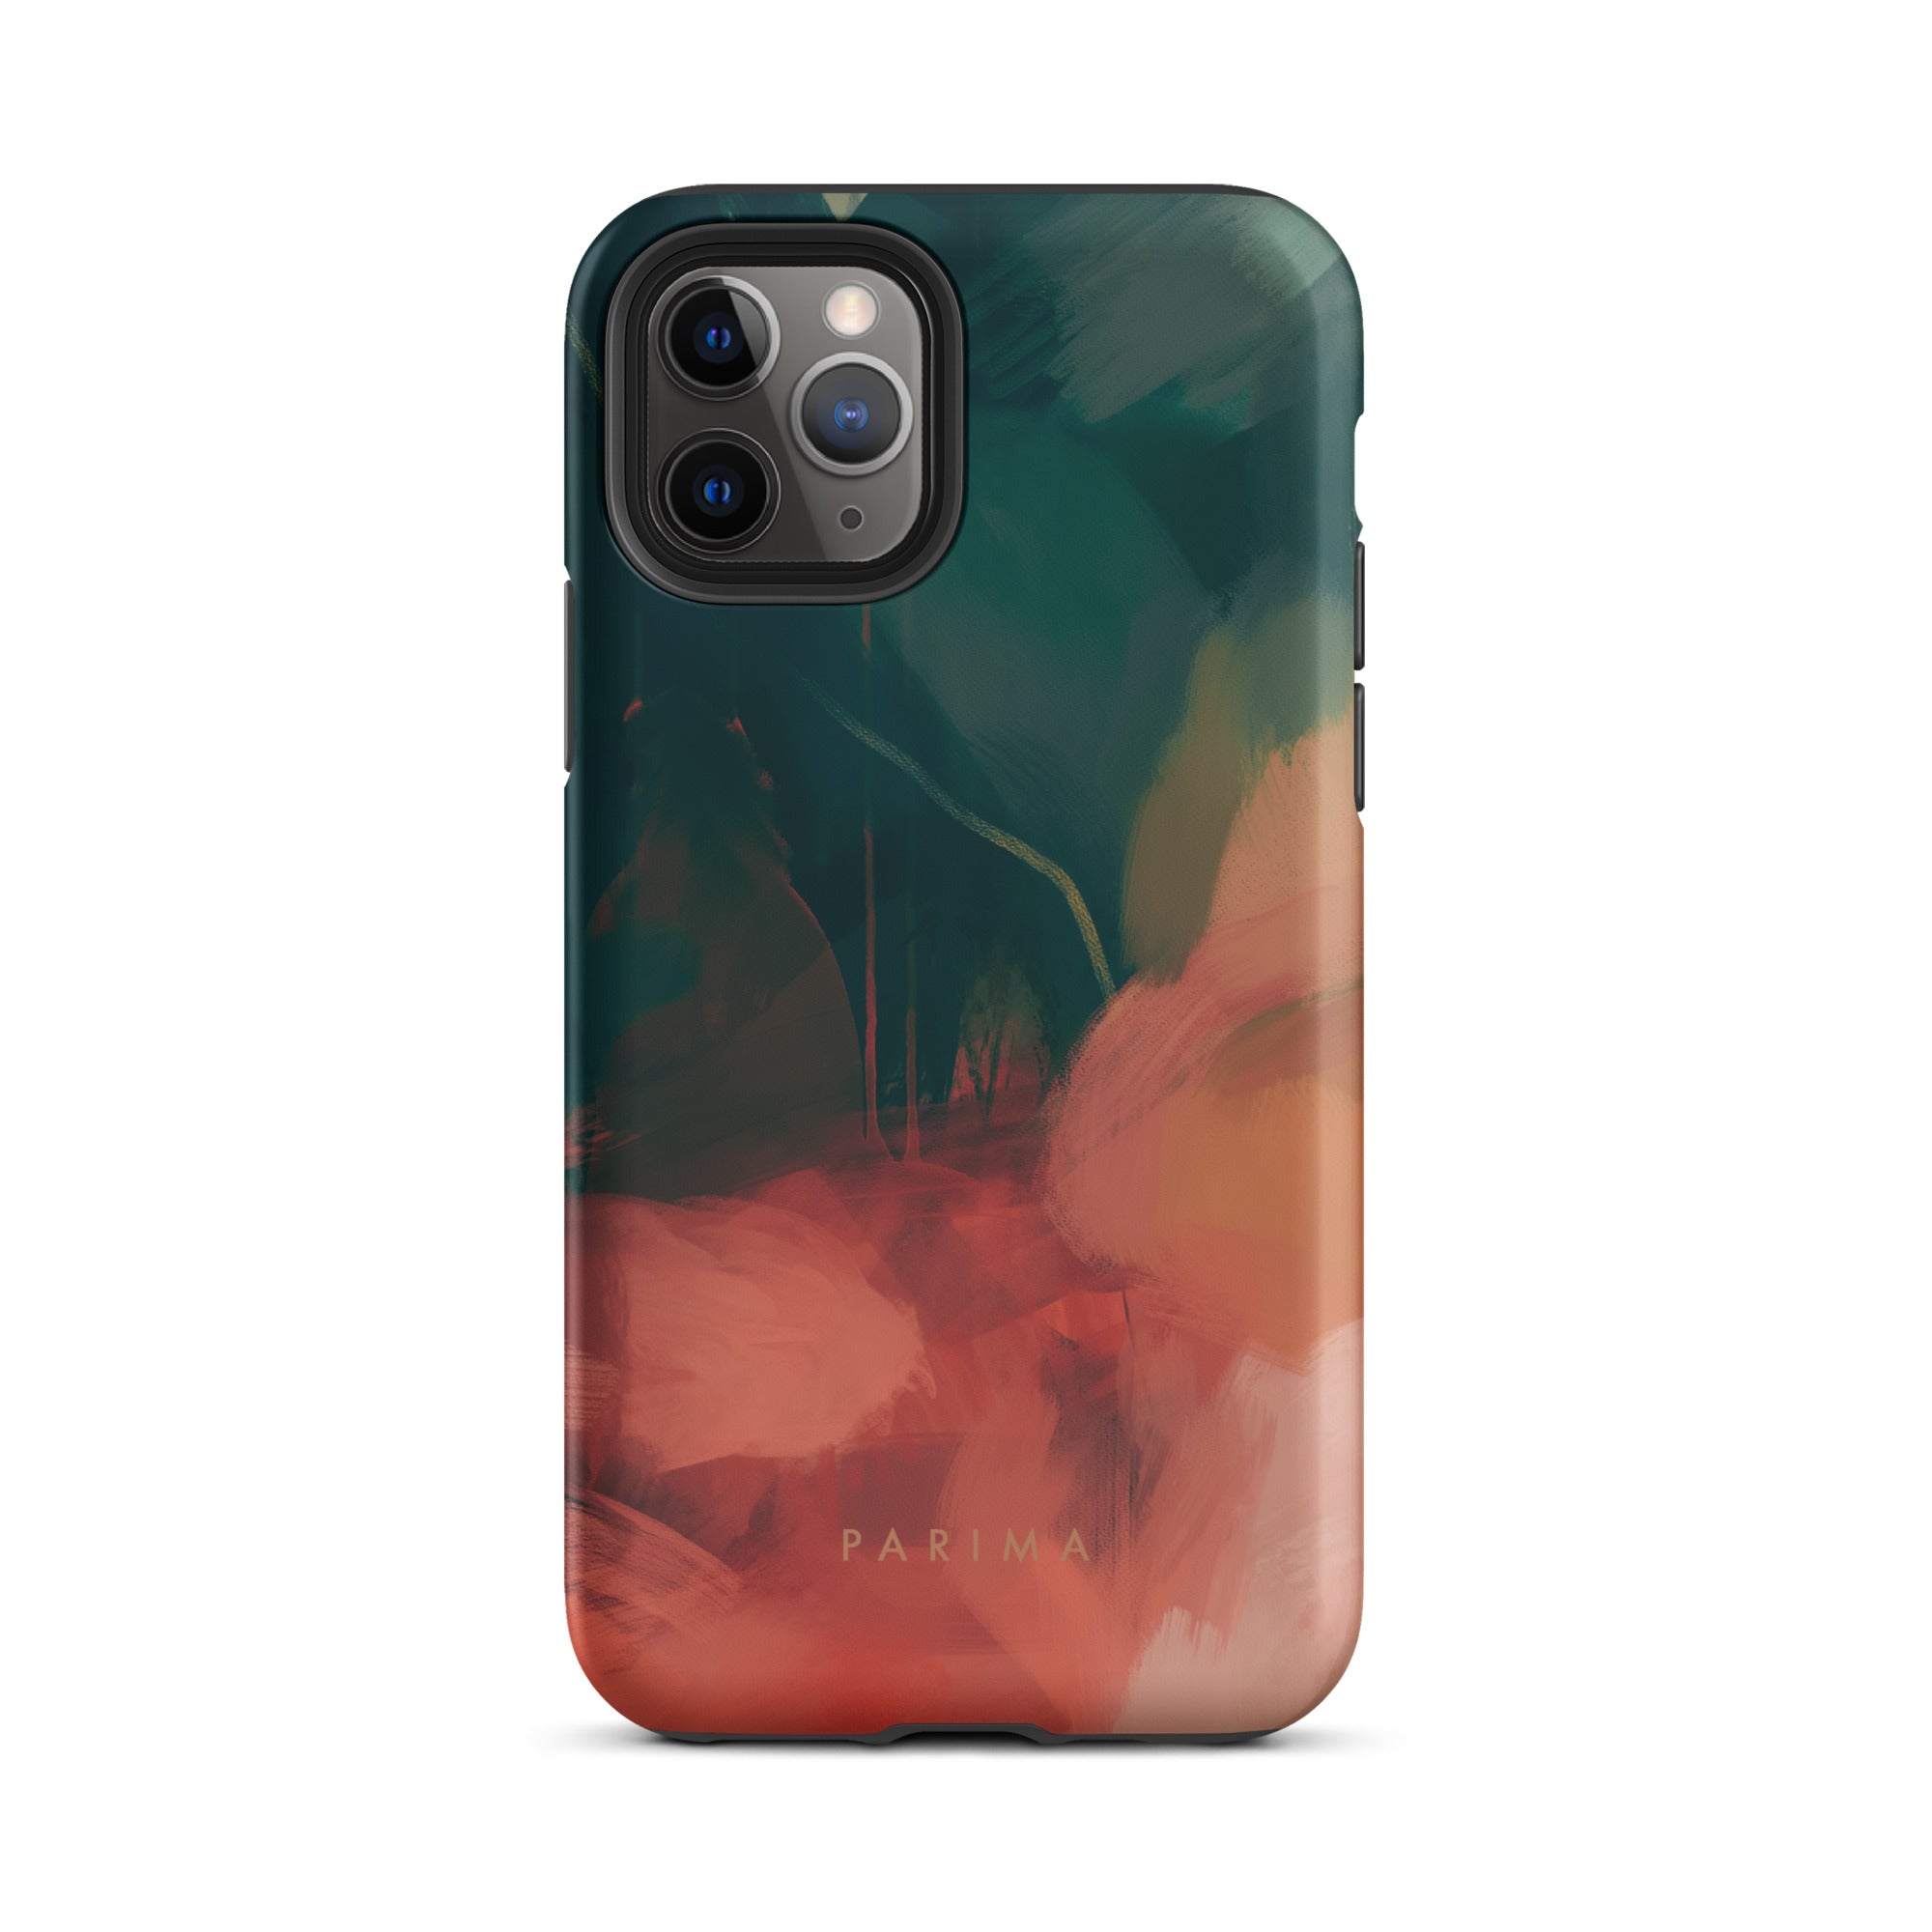 Eventide, green and red abstract art - iPhone 11 Pro tough case by Parima Studio